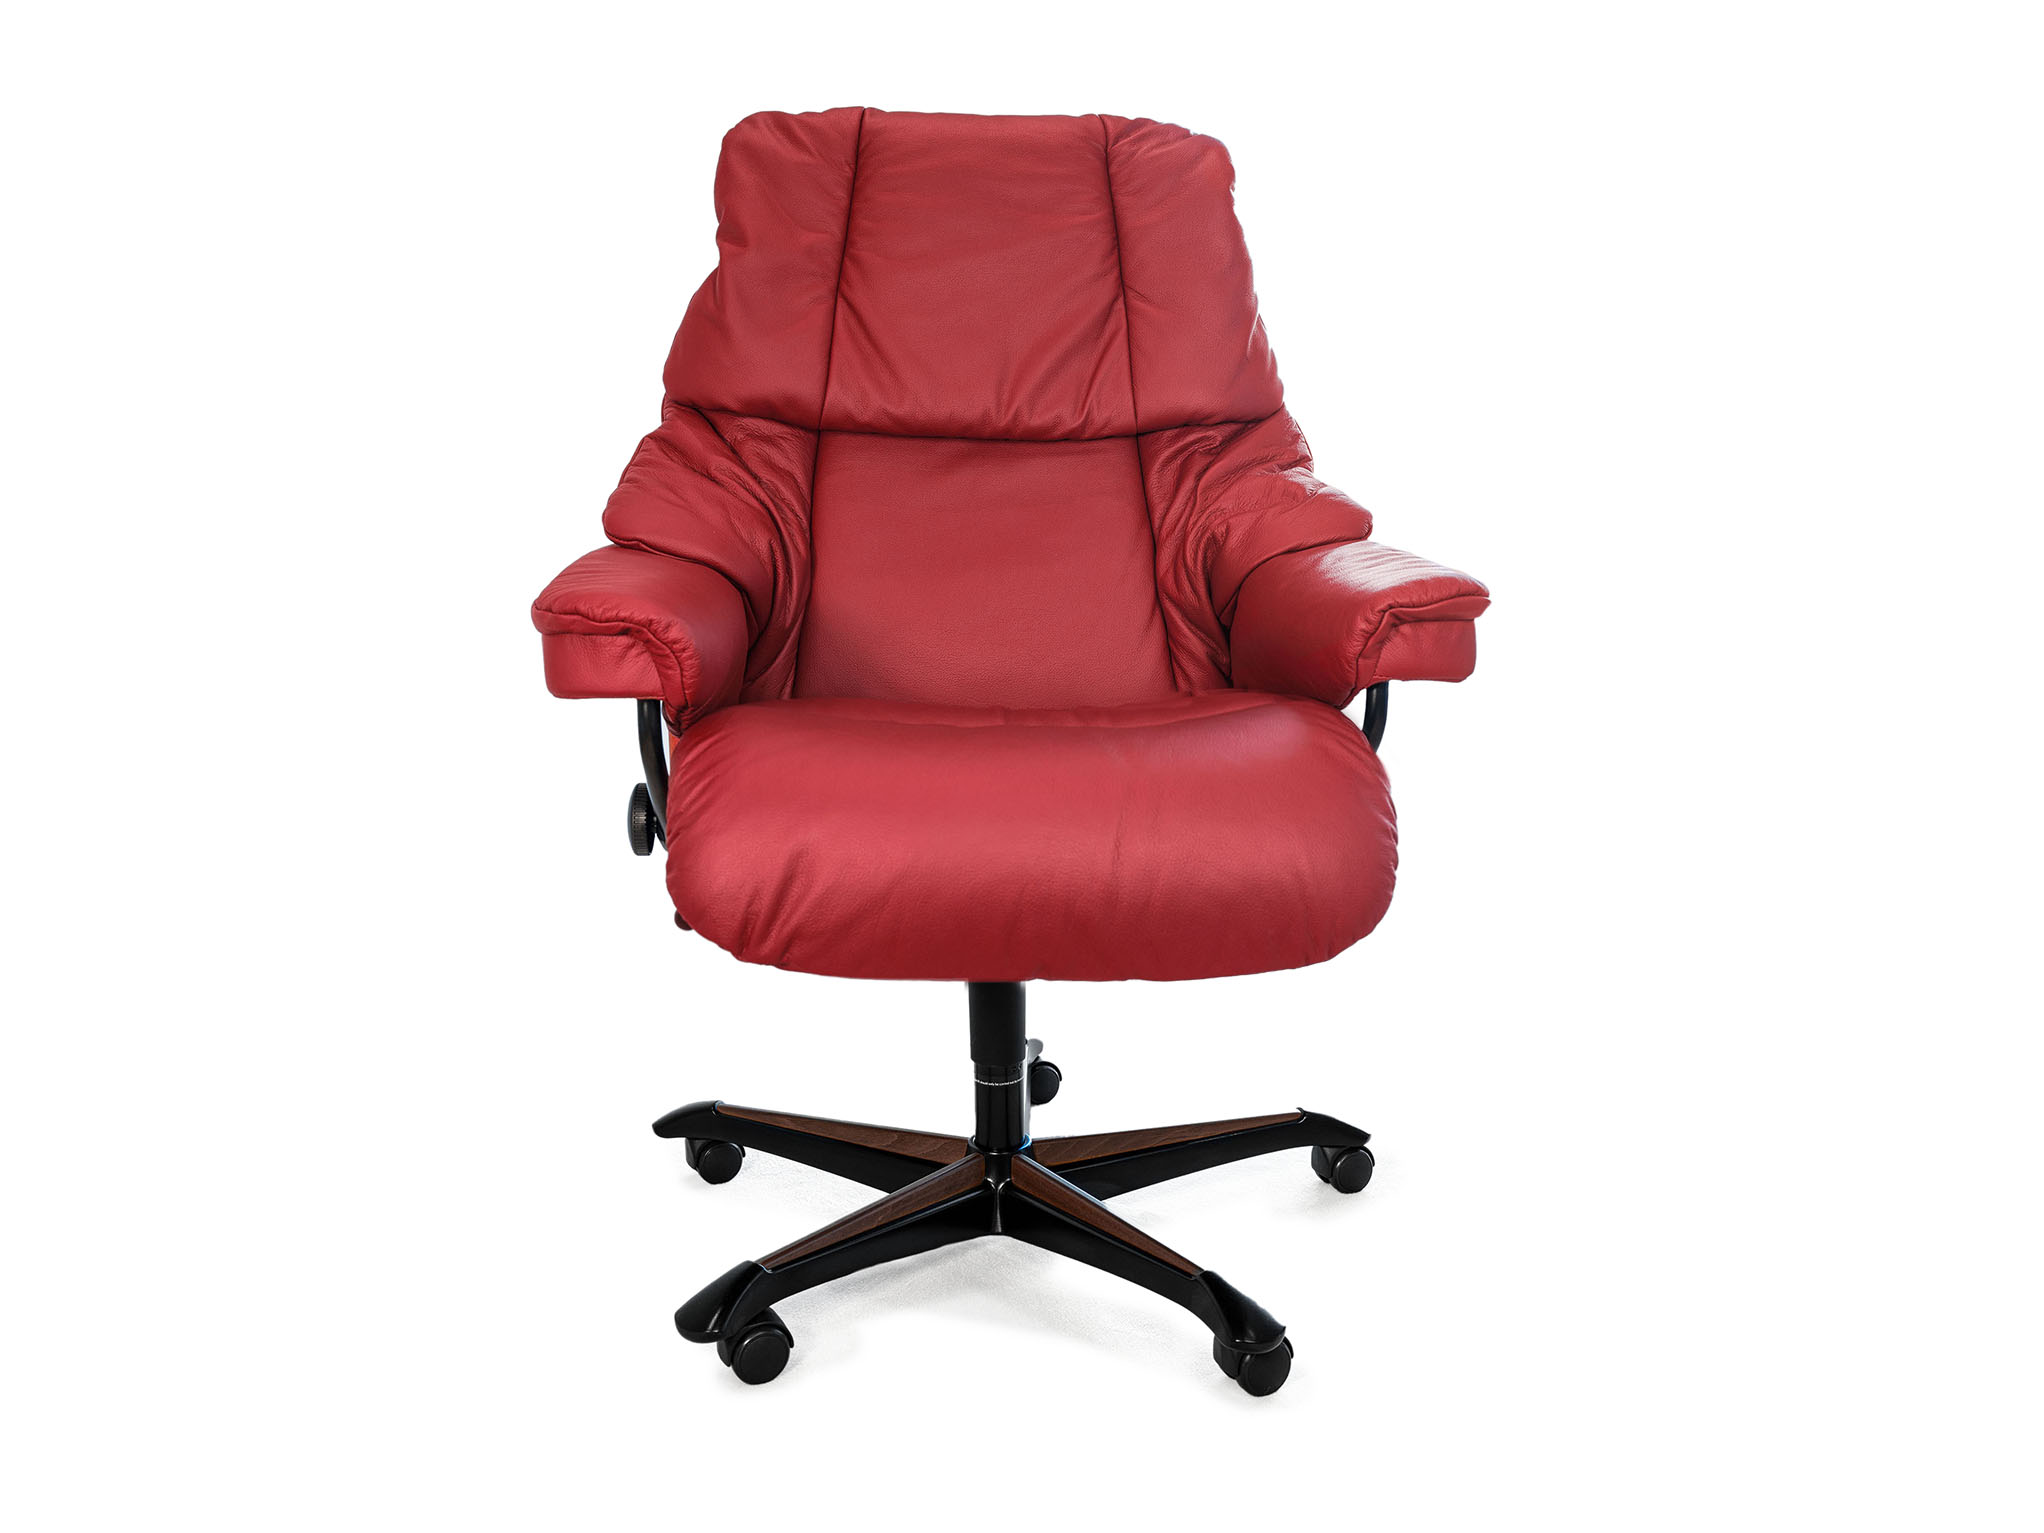 Stressless Reno - Office Chair - Cherry Batick Leather